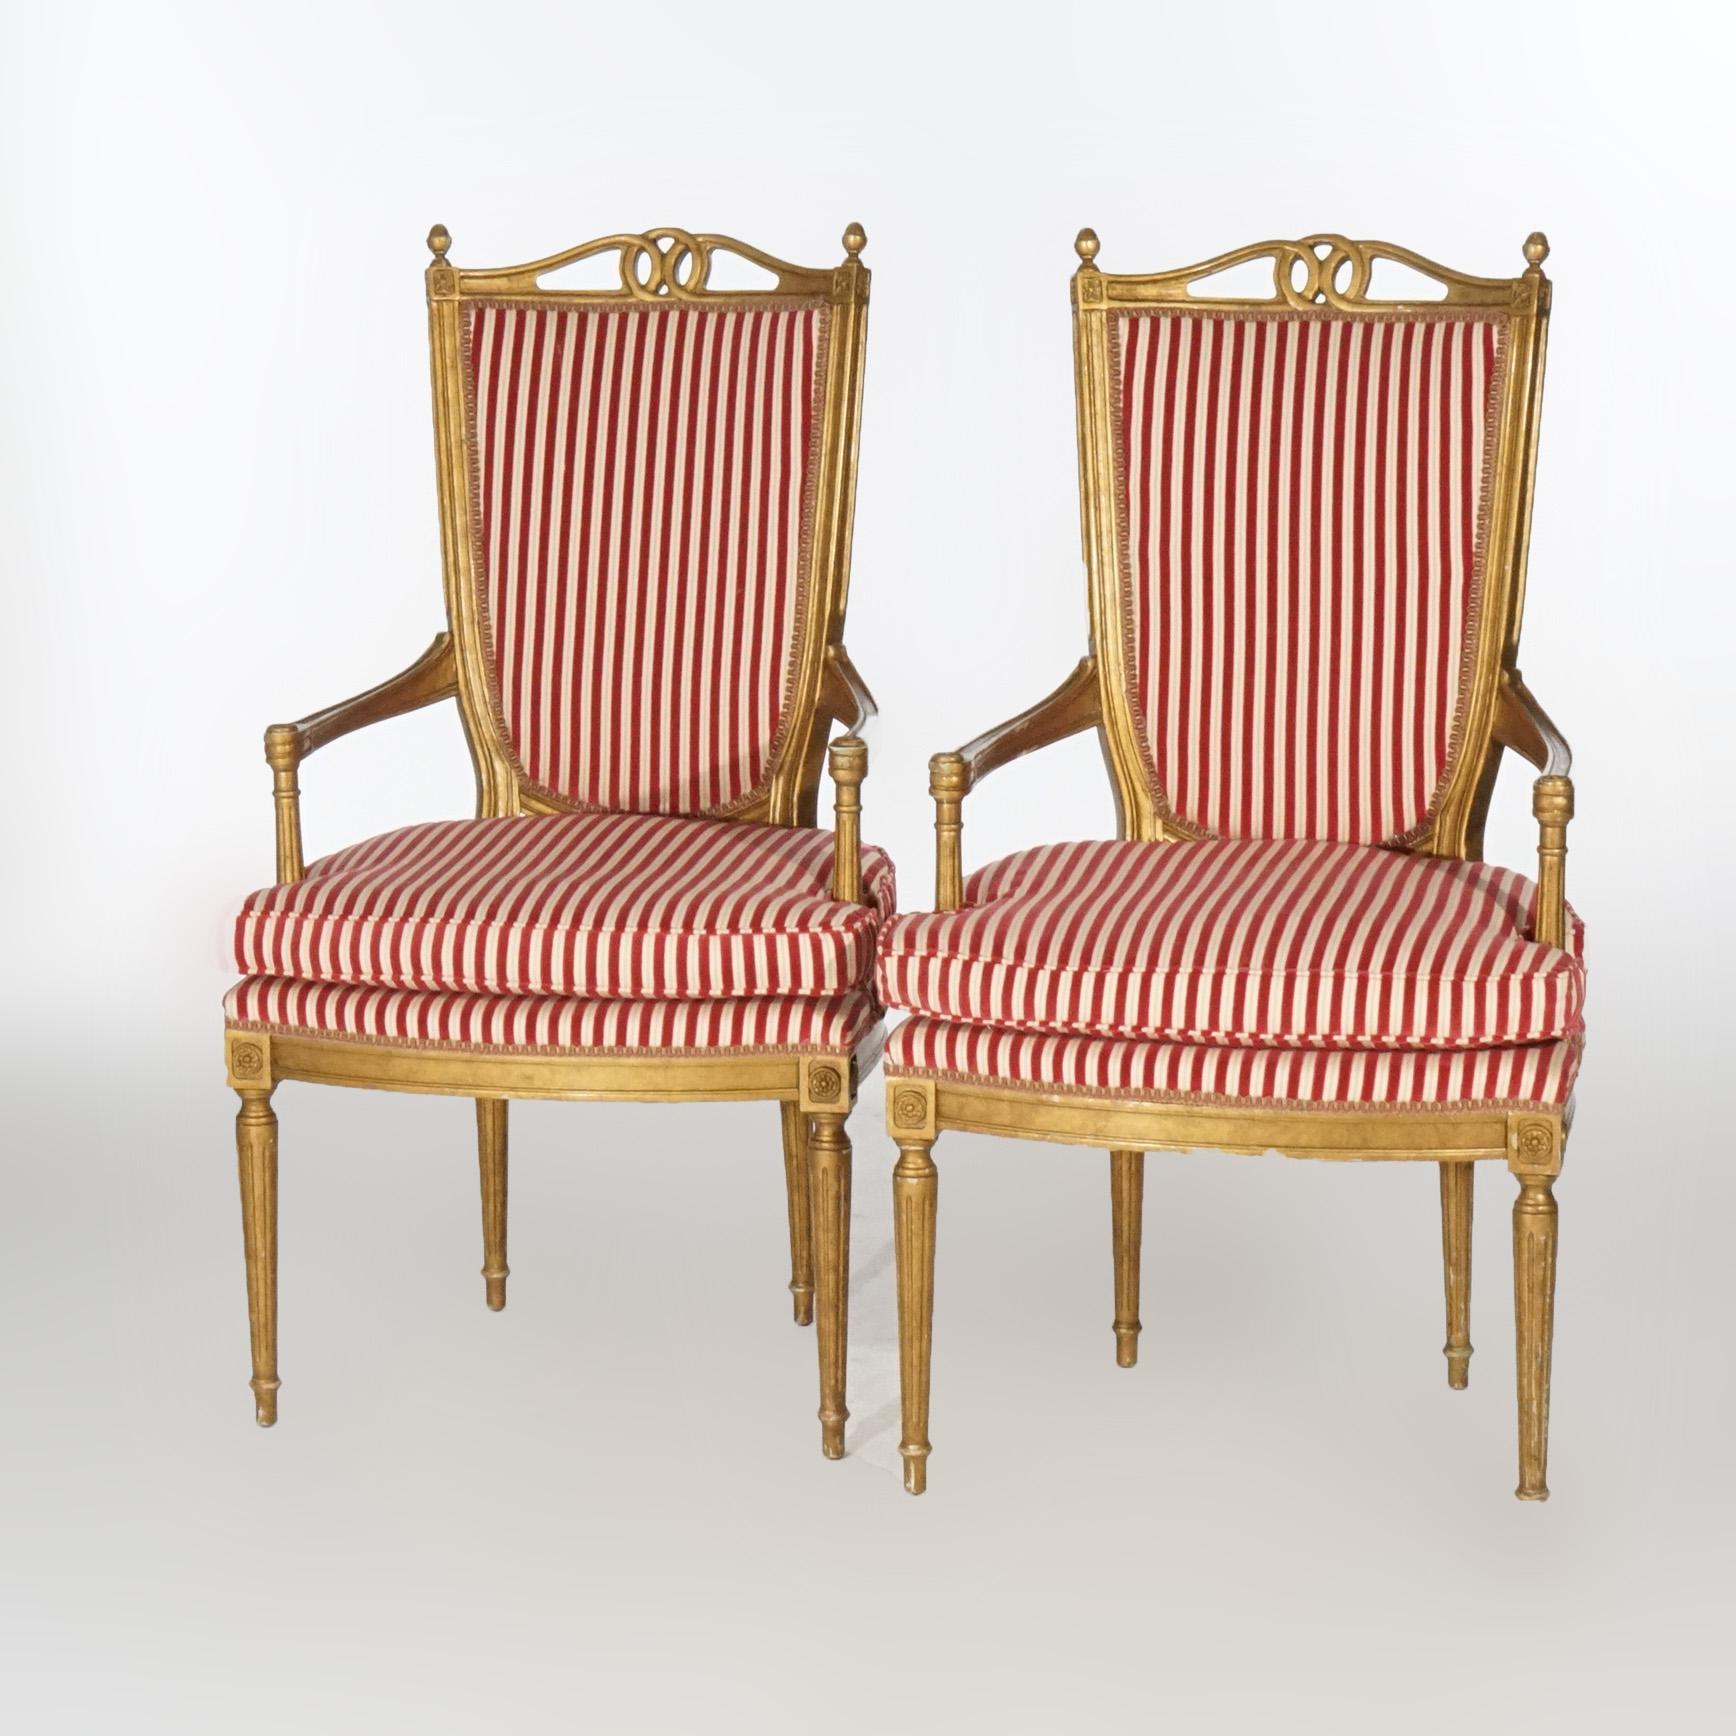 A pair of French Louis XVI style armchairs offer giltwood frames with upholstered backs and seats, shield form backs with flanking finials, raised on tapered turned legs, 20th century

Measures- 44.5''H x 24.5''W x 25.5''D.